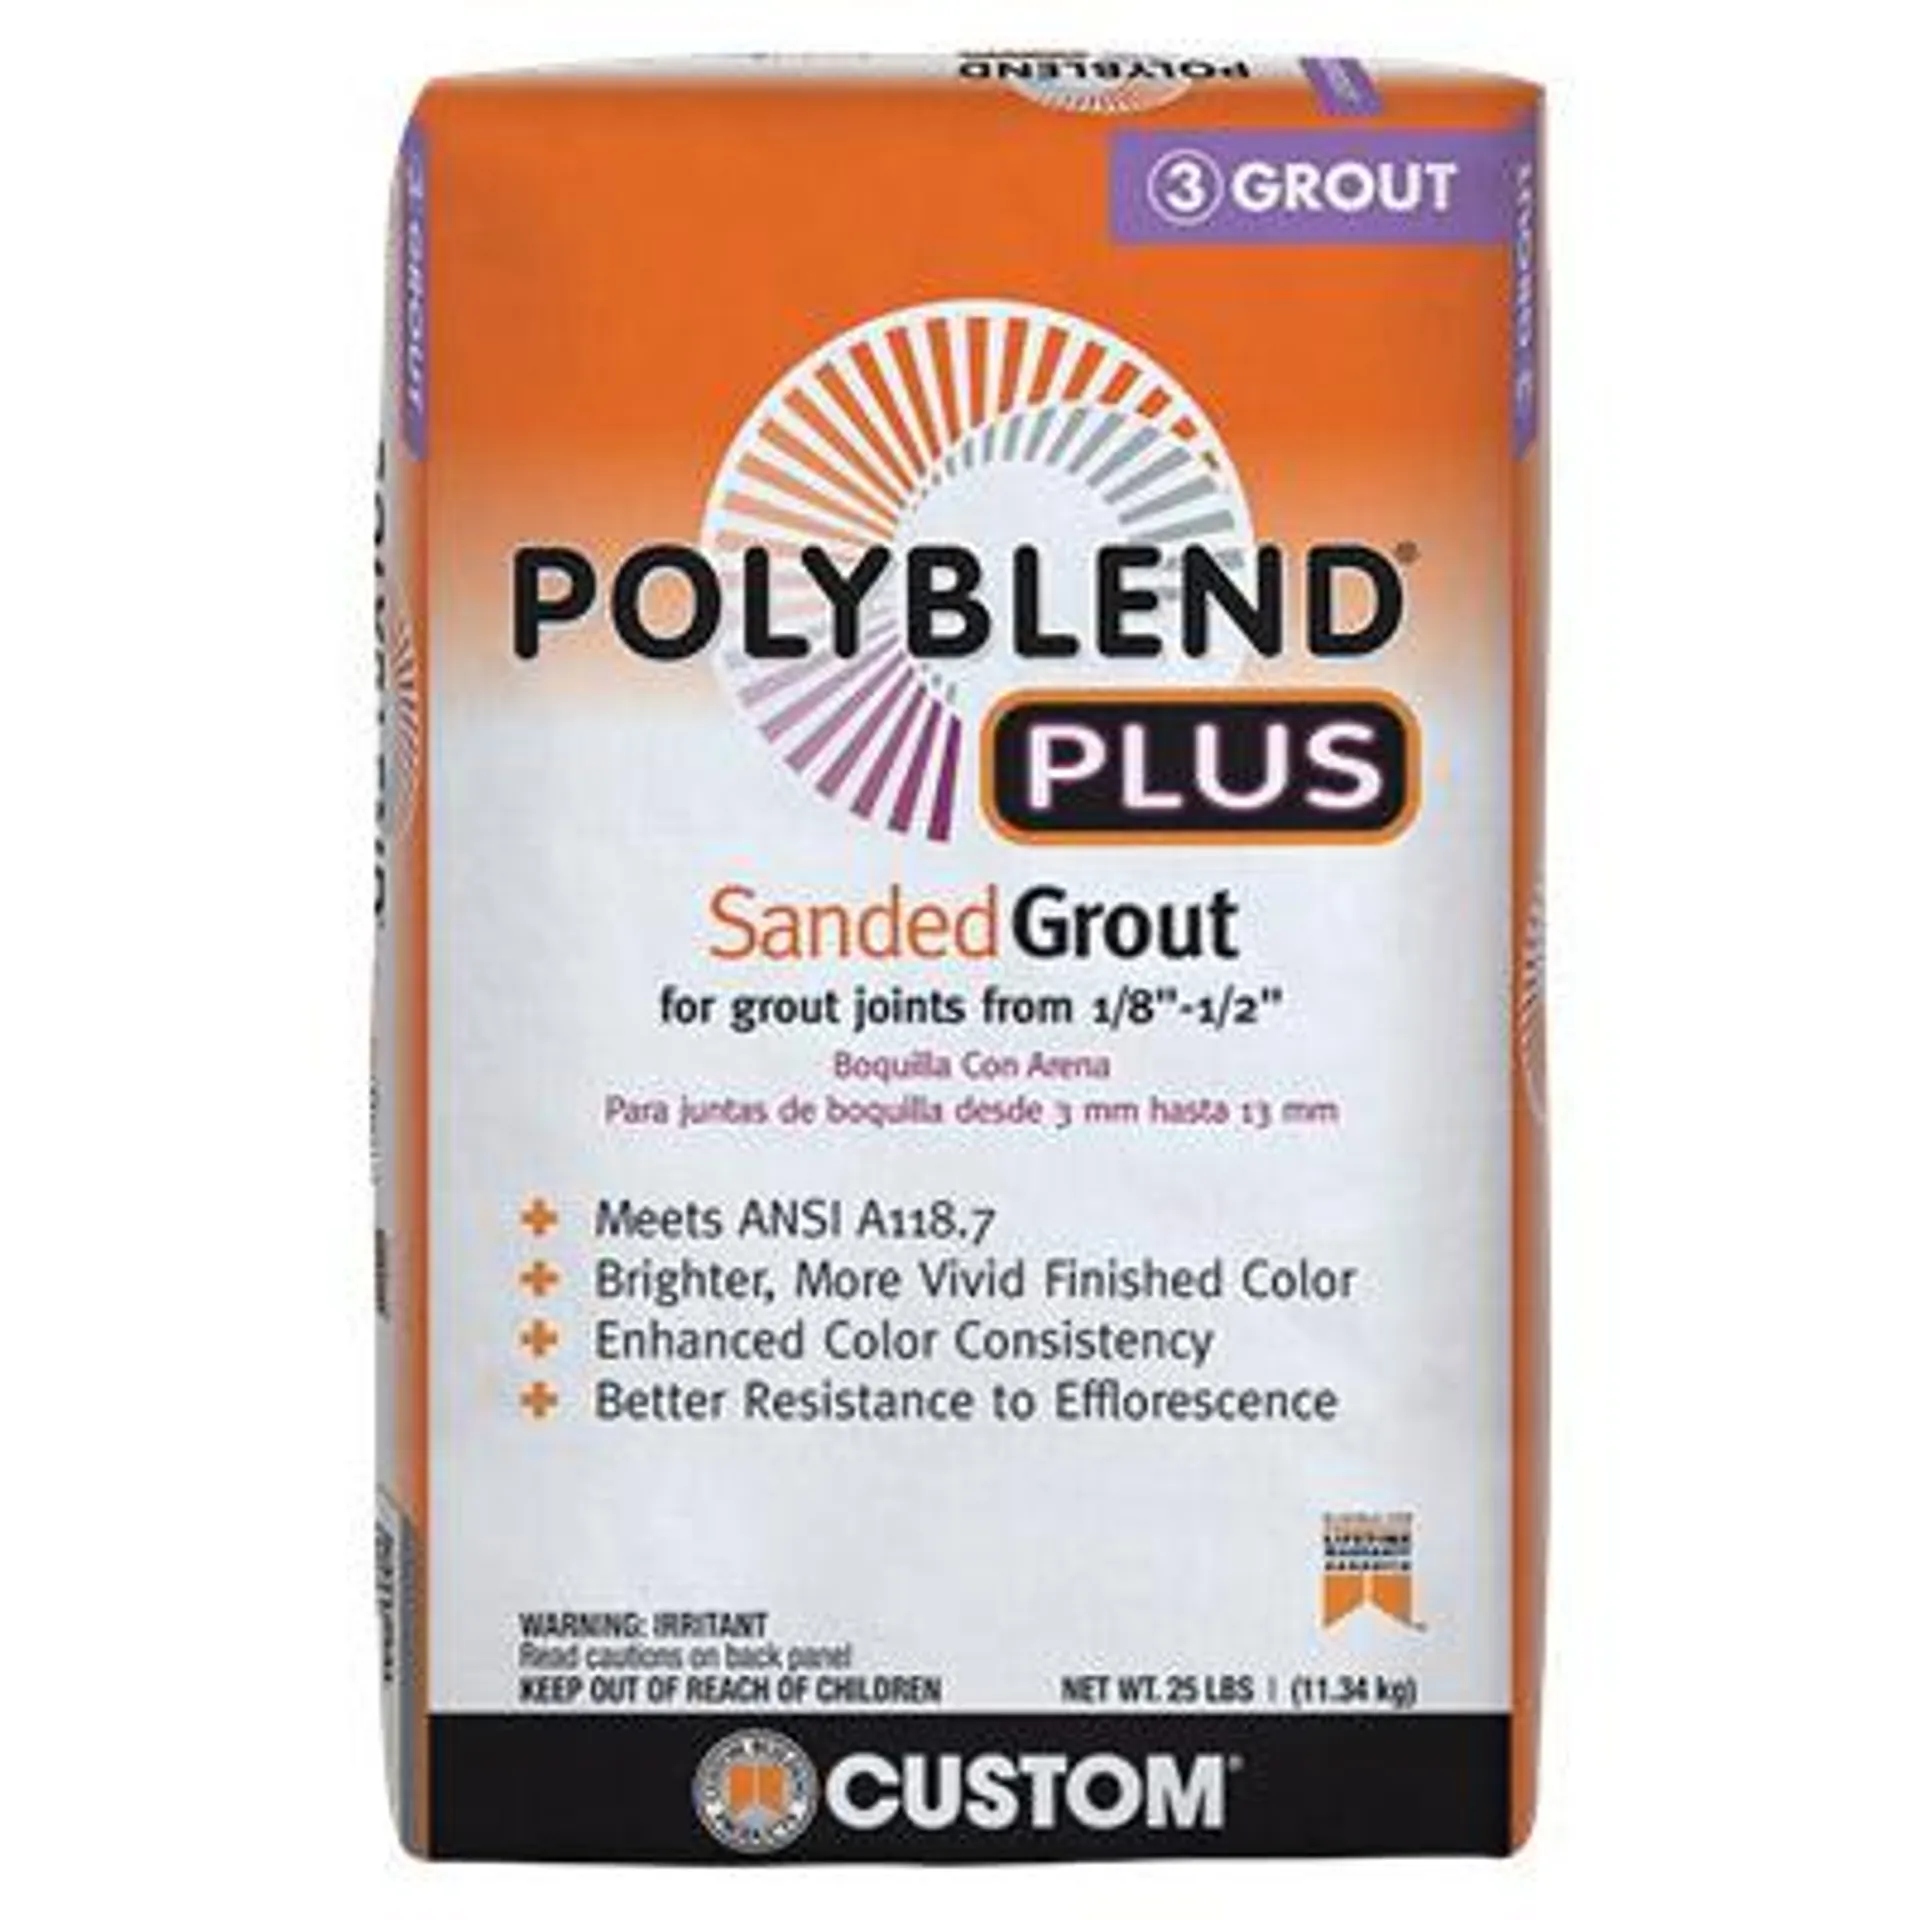 Polyblend Plus PBPG64625 Sanded Grout, Powder, Characteristic, Coffee Bean, 25 lb Bag